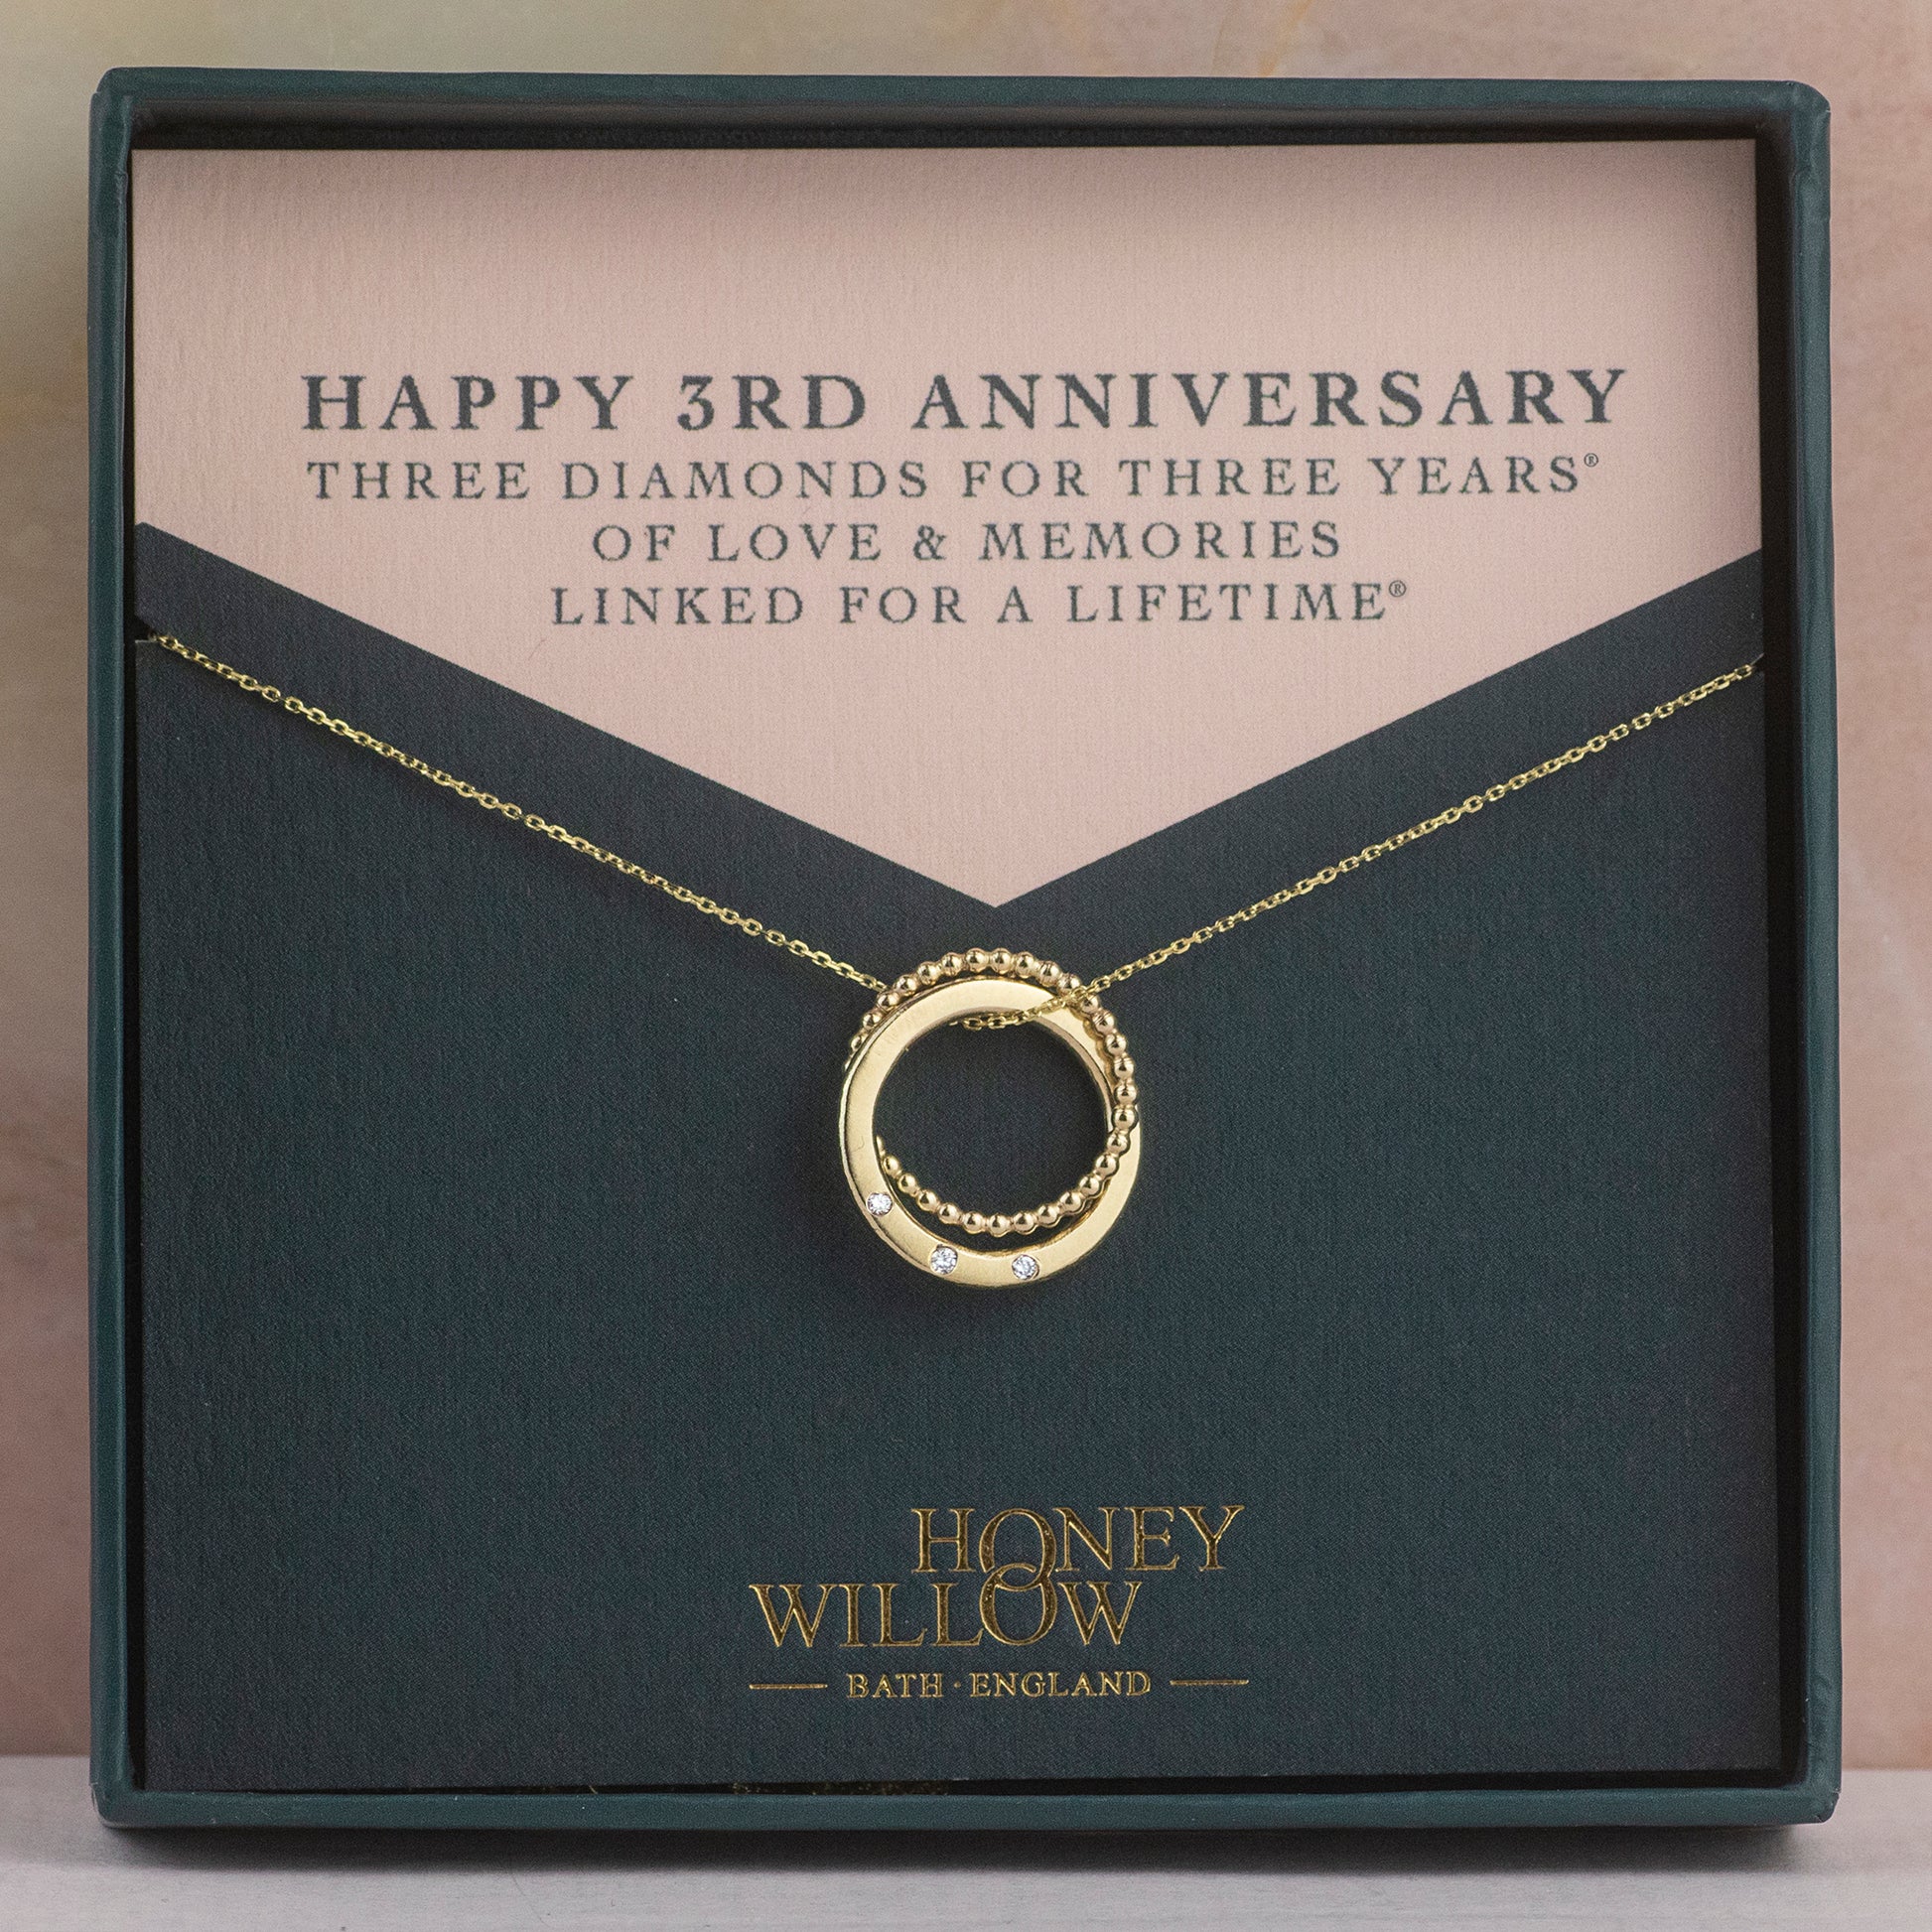 3rd Anniversary Necklace - 3 Diamonds for 3 Years - 9kt Gold